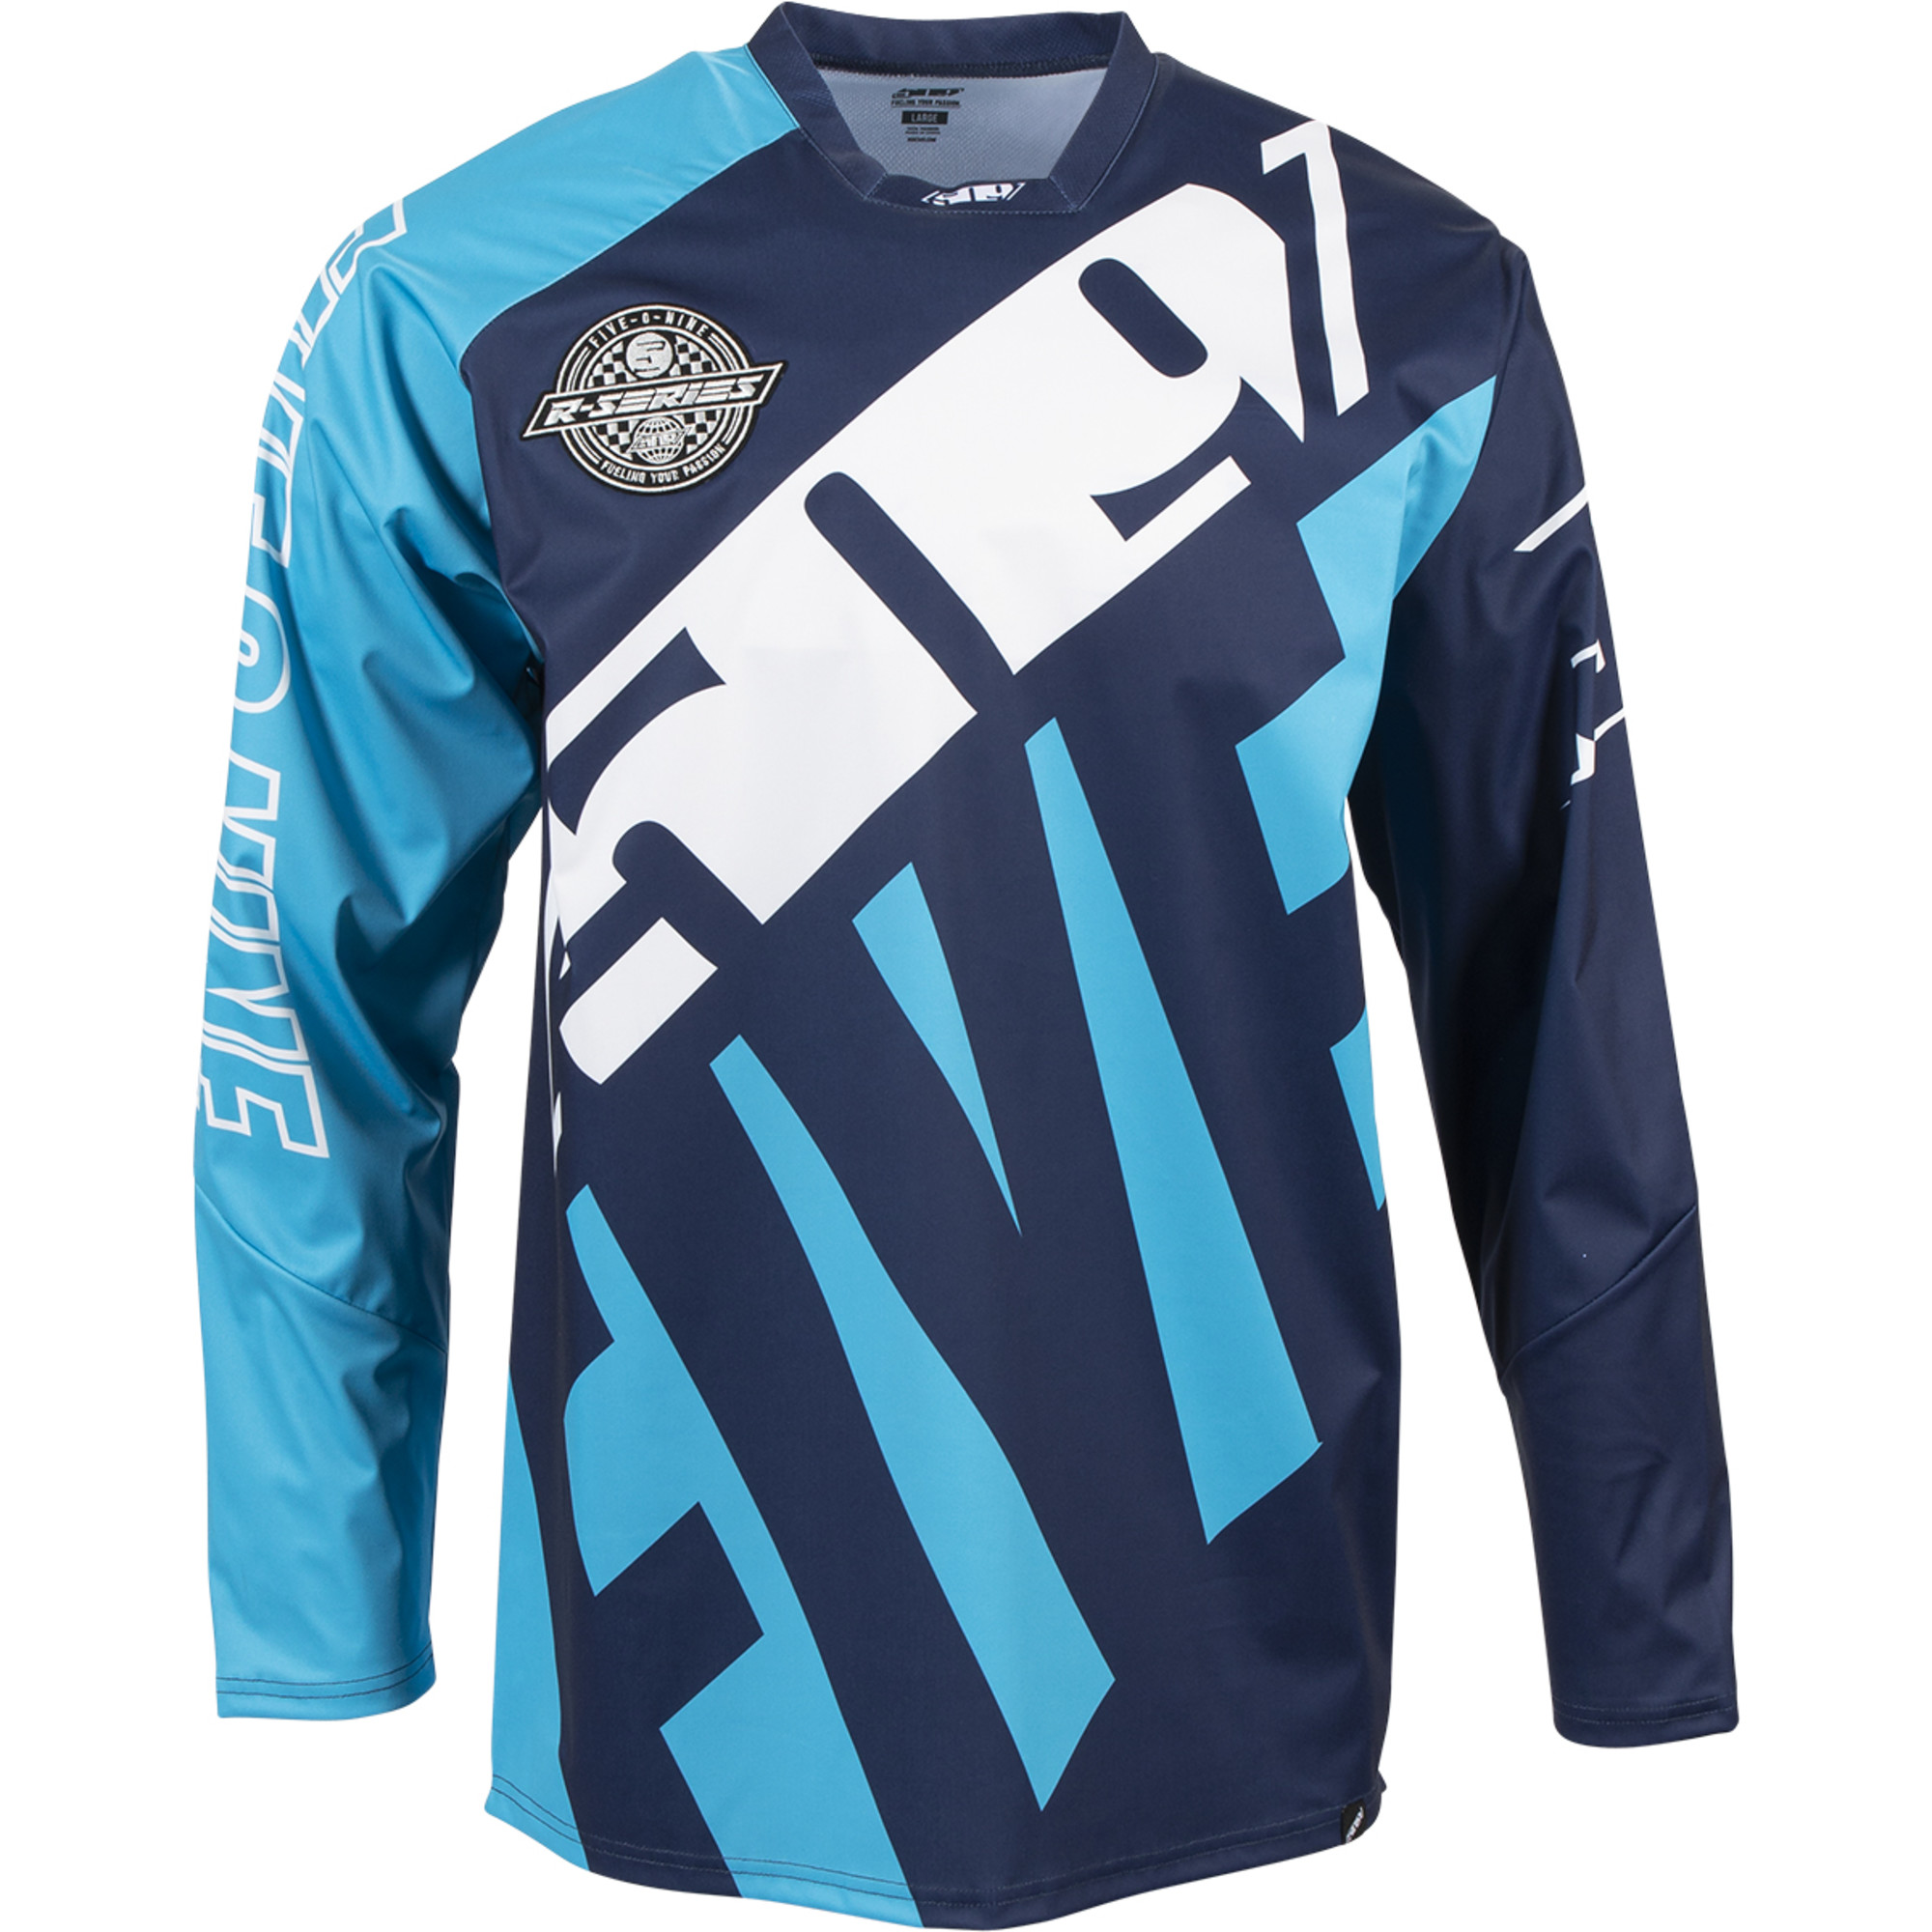 r-series windproof jersey dark ops with